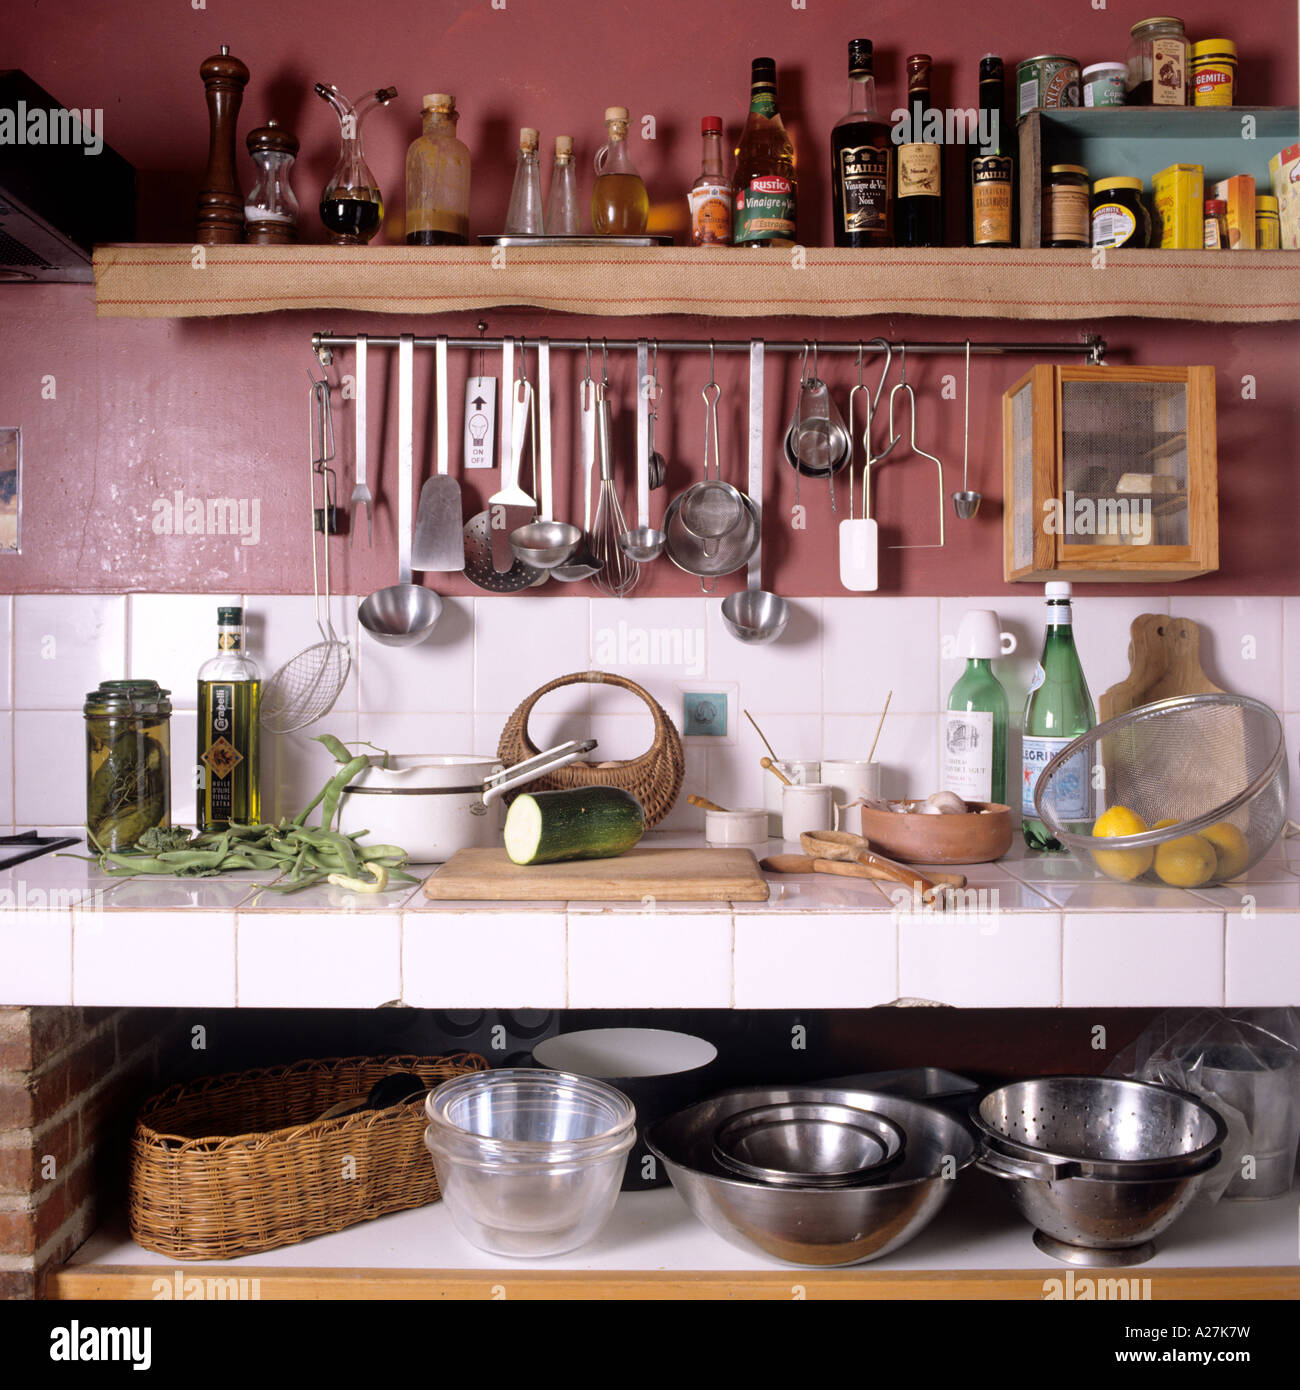 https://c8.alamy.com/comp/A27K7W/french-country-kitchen-with-white-tiles-A27K7W.jpg